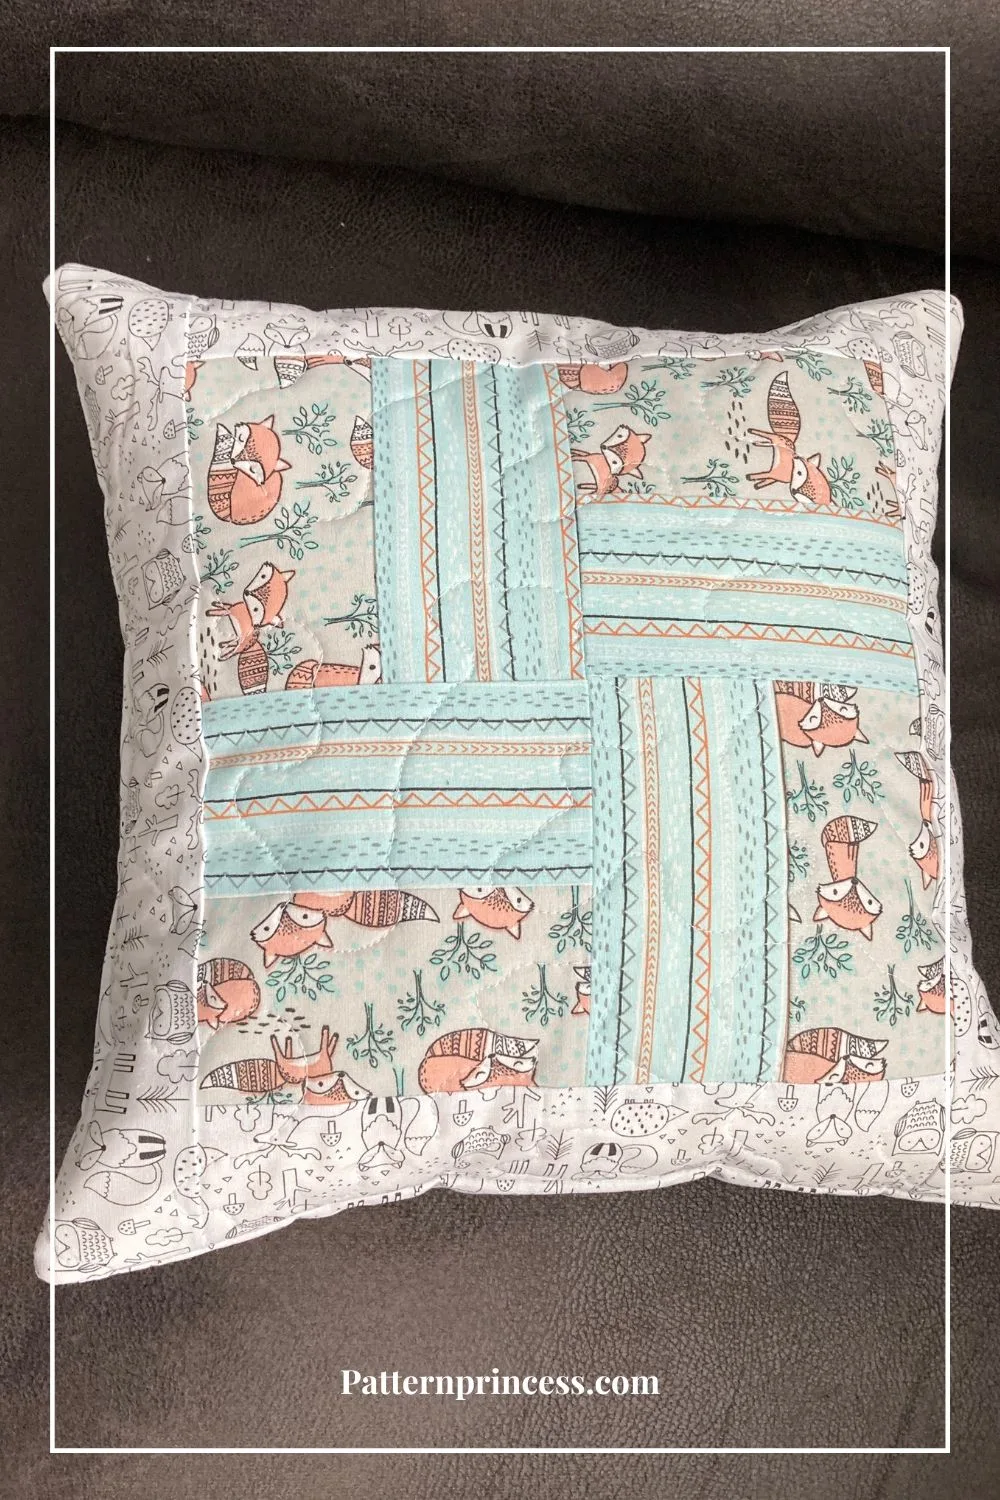 Front of Pillow Cover